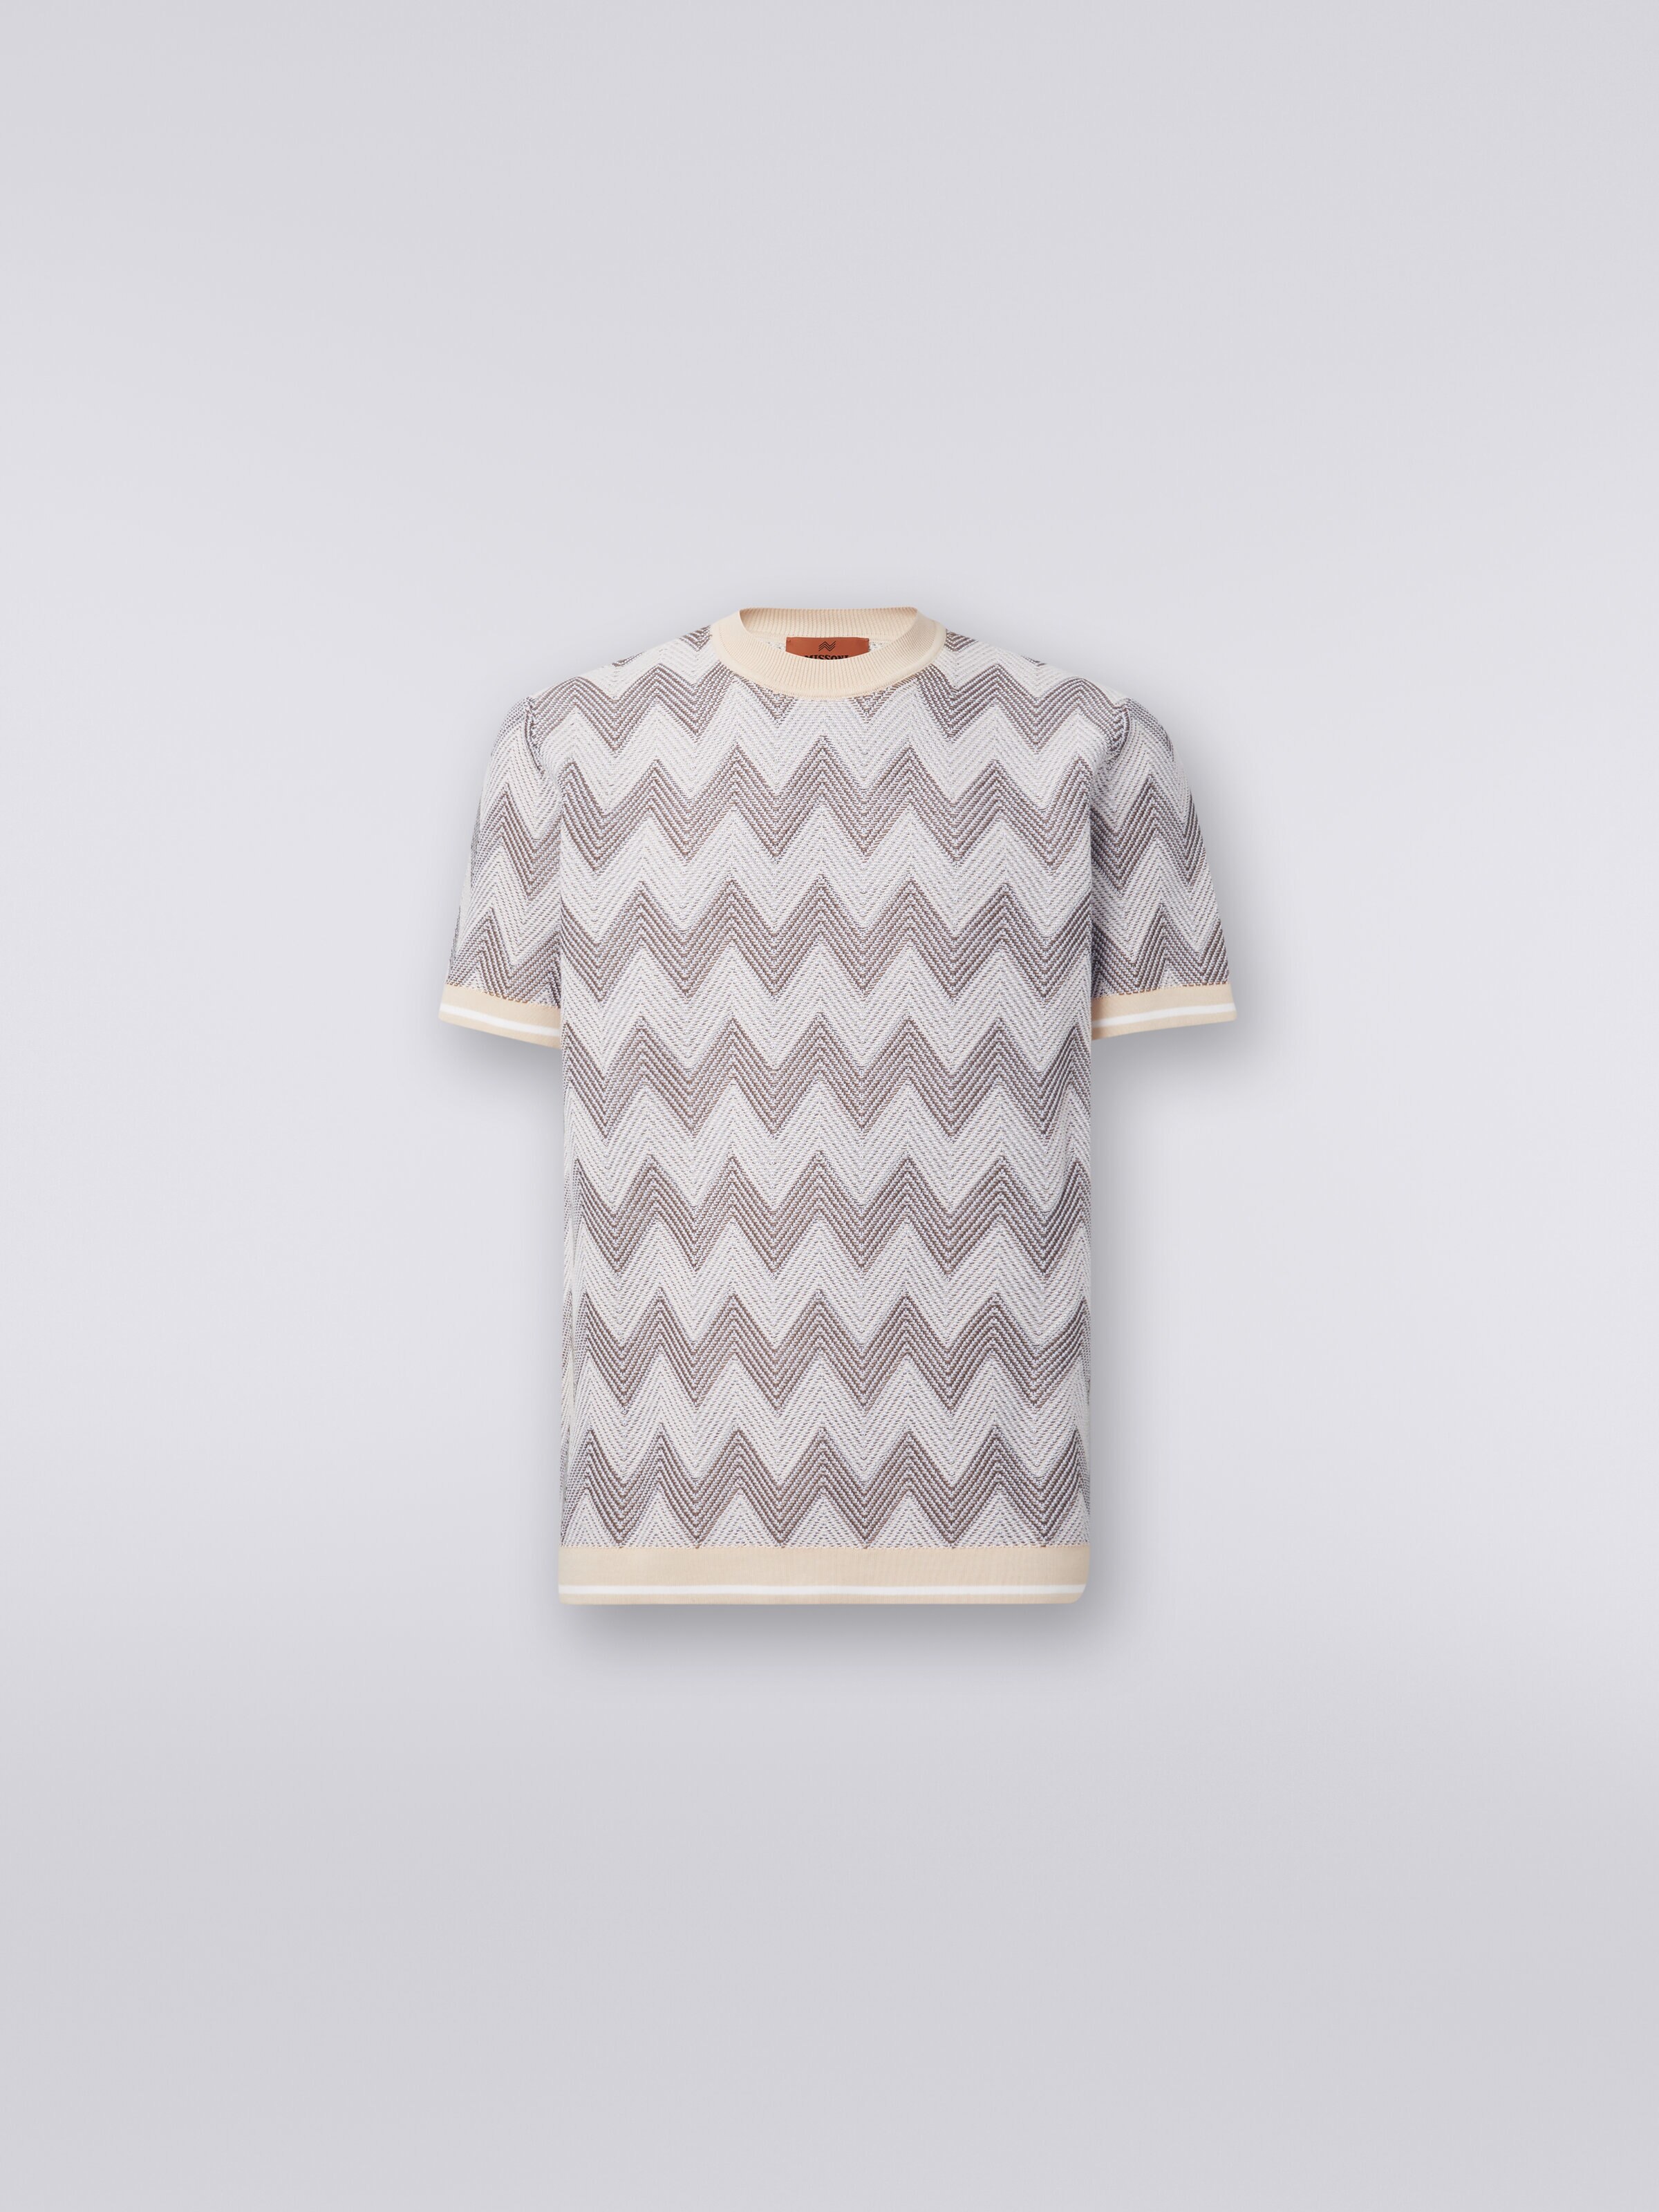 T-shirt in chevron cotton knit with contrasting trim, Multicoloured  - 0